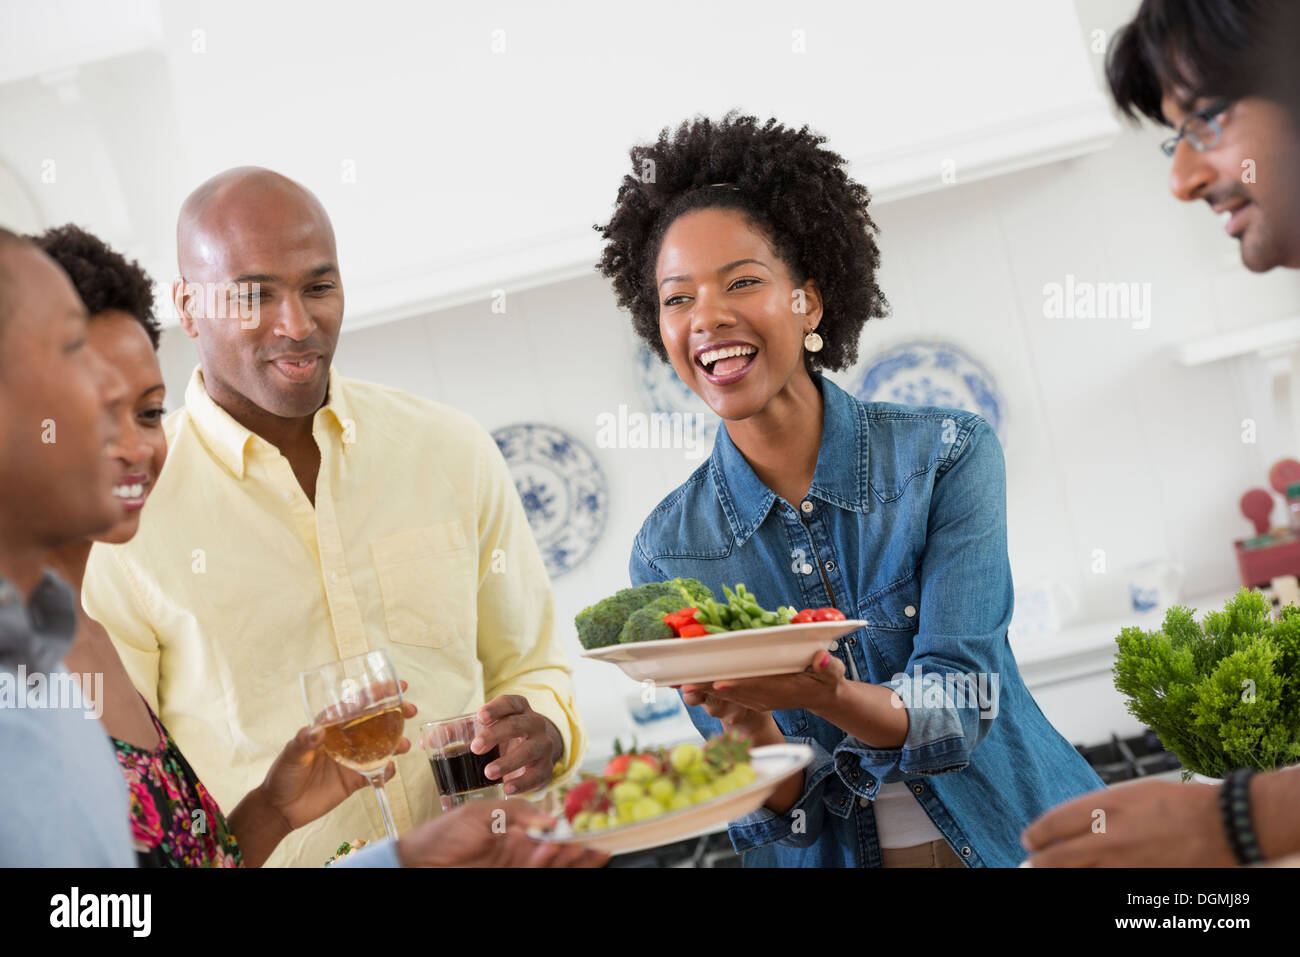 An informal office event. People handing plates of food across a buffet table. Stock Photo